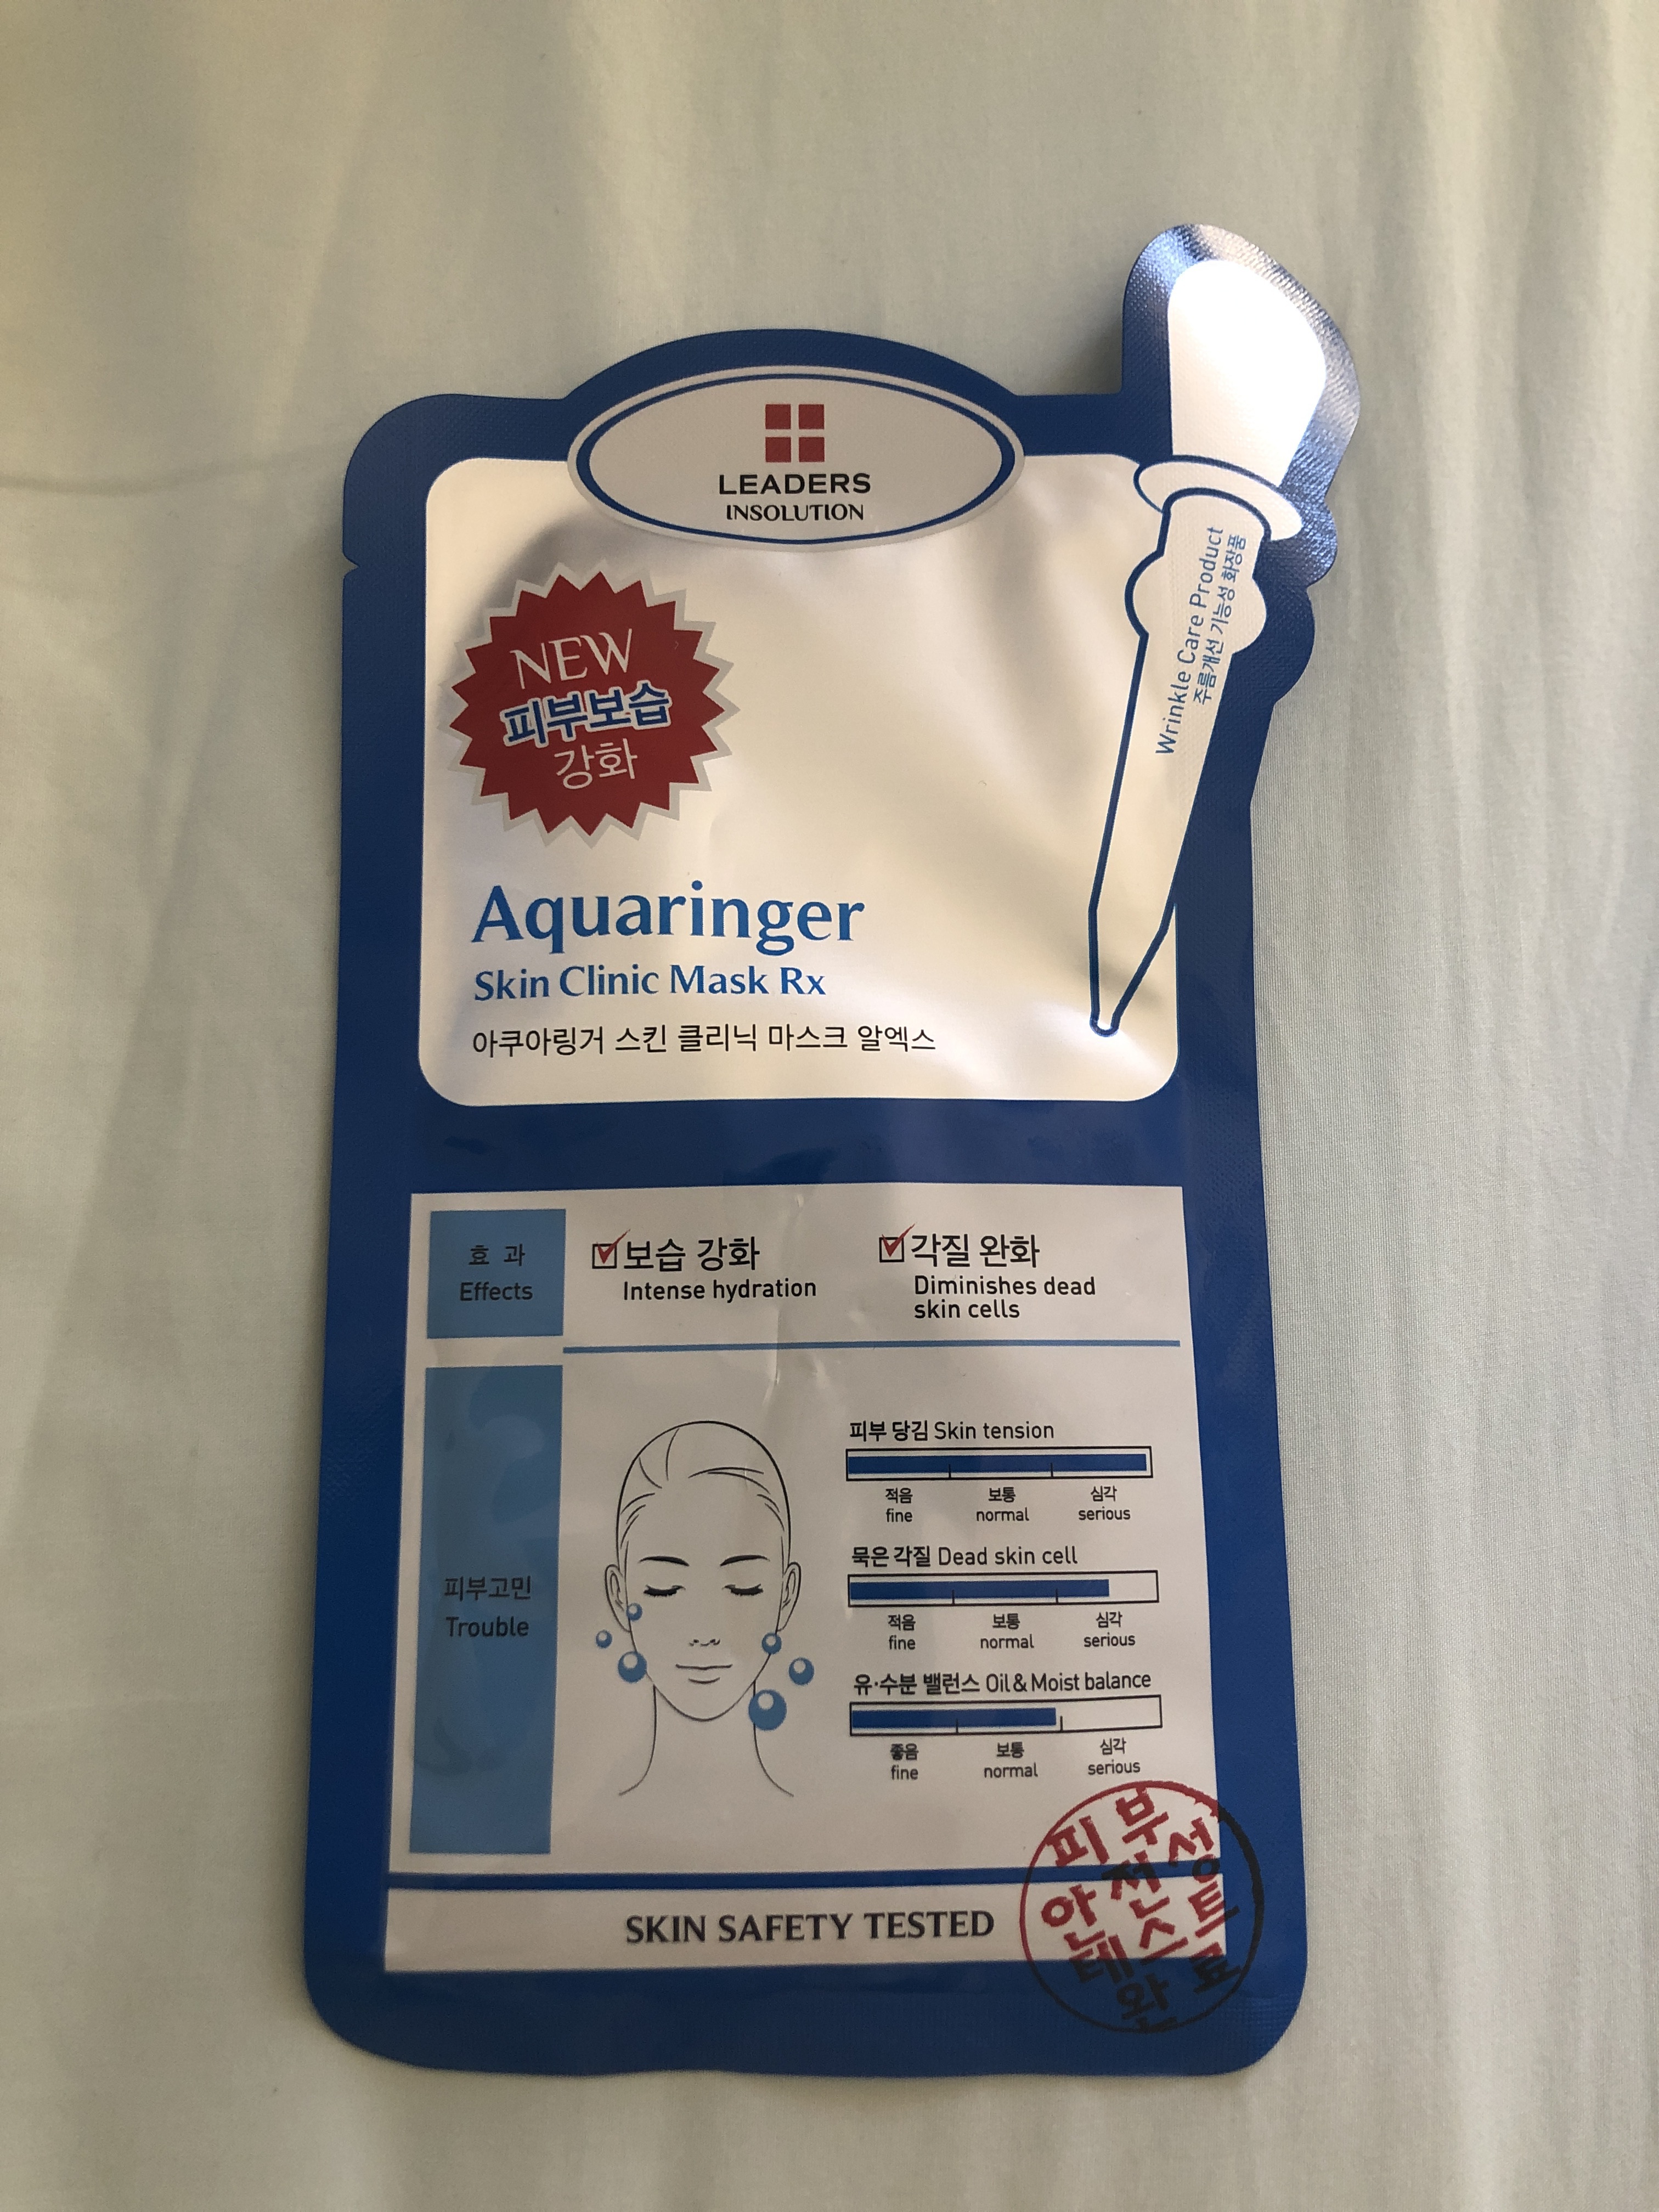 Leaders Insolution Aquaringer Skin Clinic Mask Rx